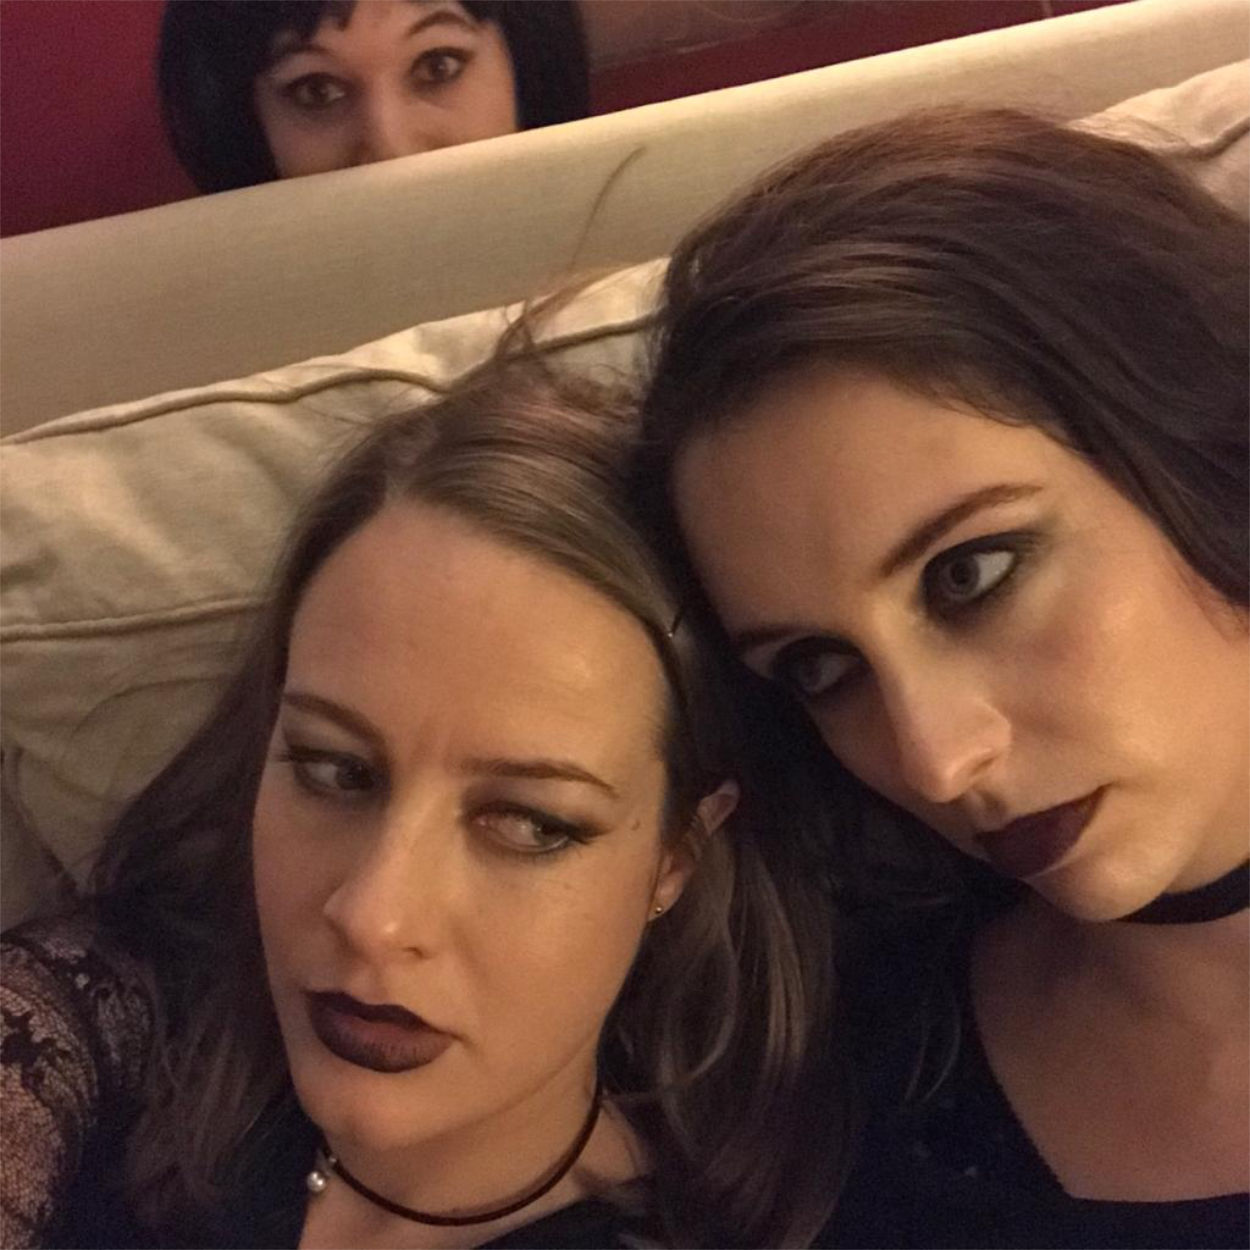 Two girls with dark makeup on sat on a couch with someone peeking up behind